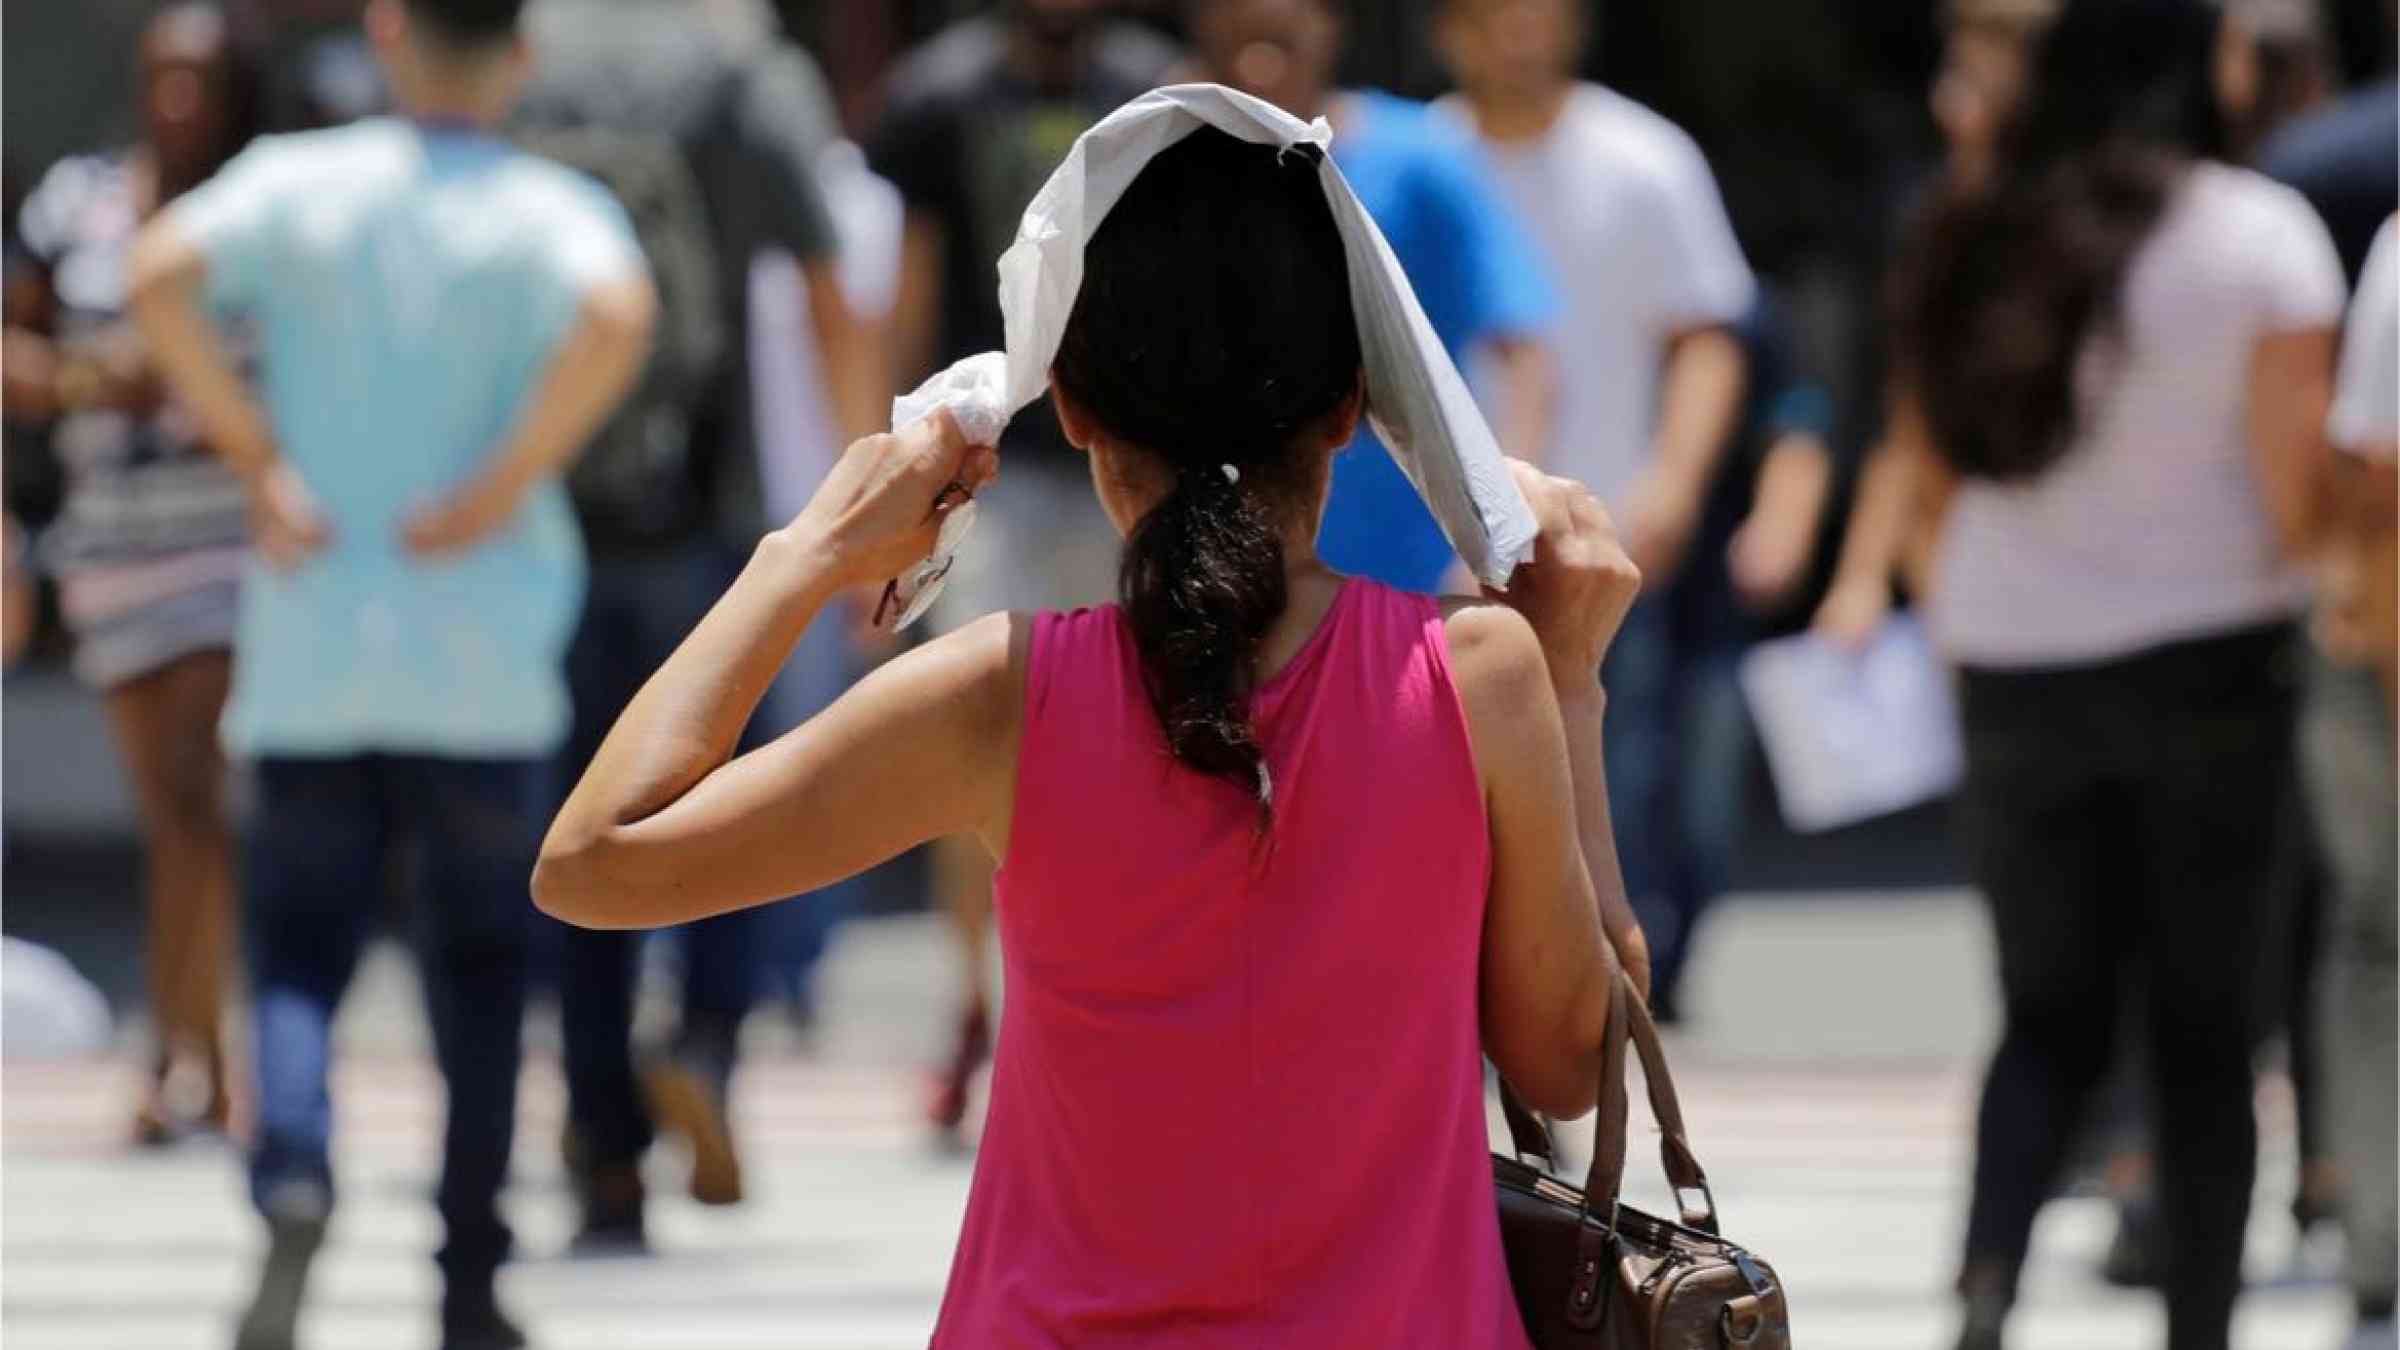 Women covering her head from the sun